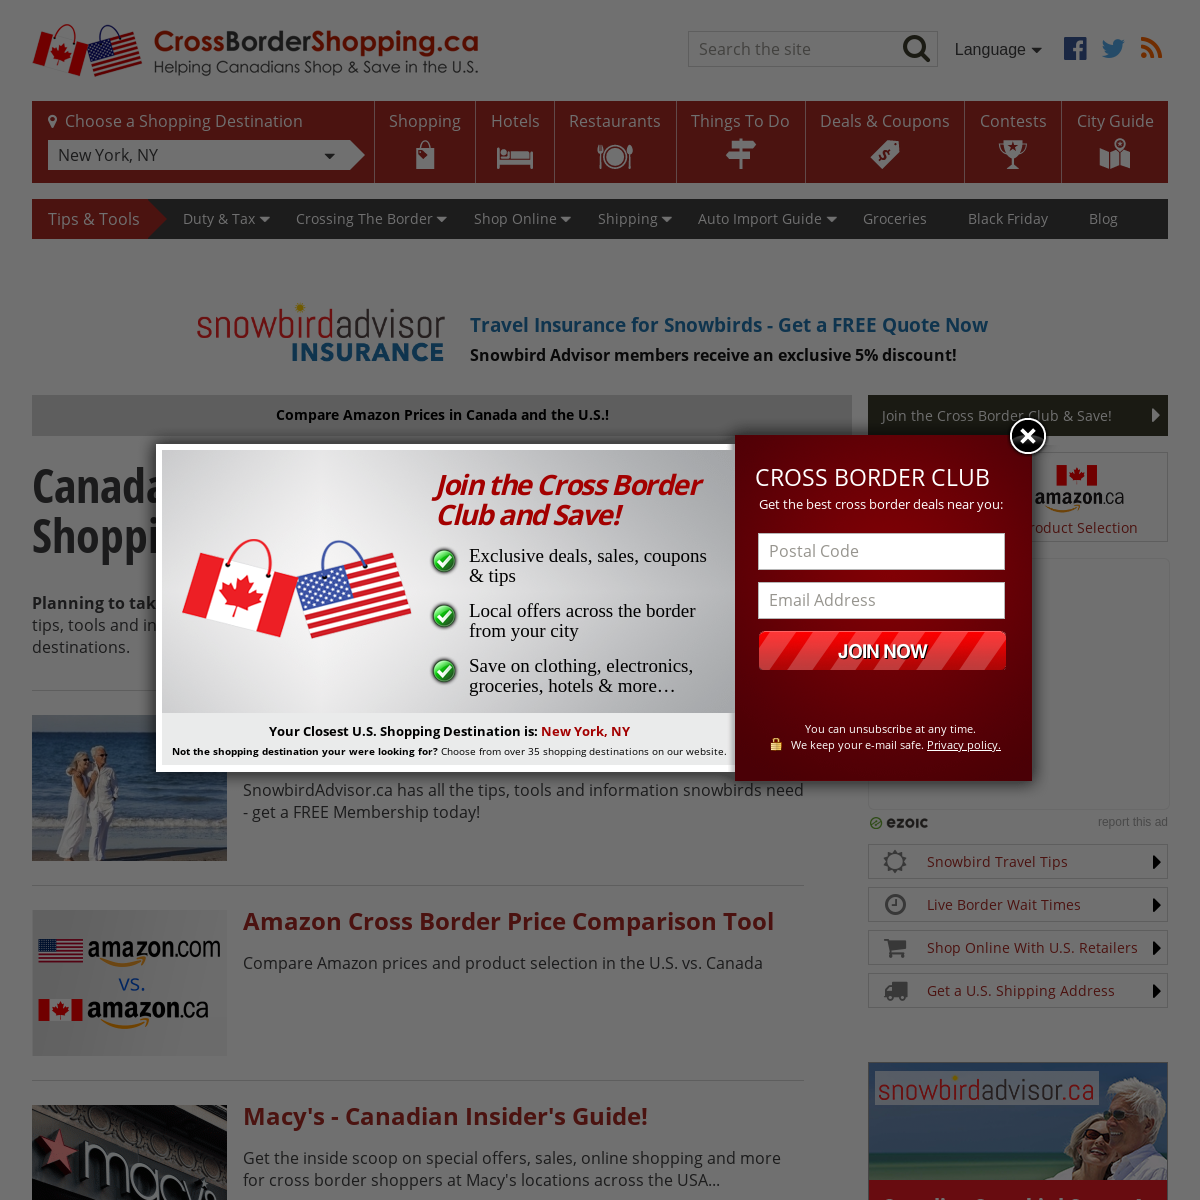 A complete backup of crossbordershopping.ca